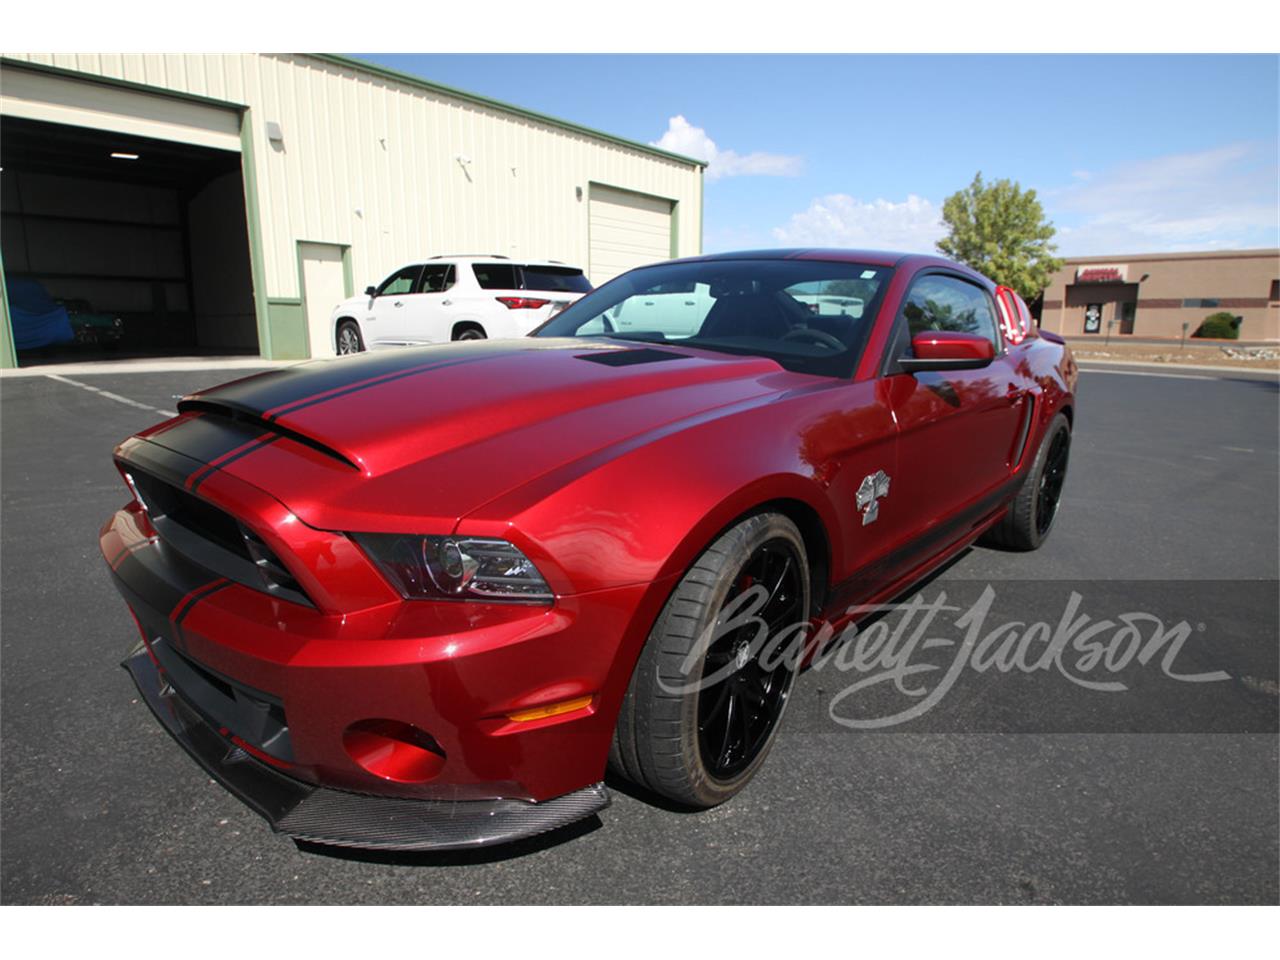 For Sale at Auction: 2014 Ford Shelby GT500 in Scottsdale, Arizona for sale in Scottsdale, AZ